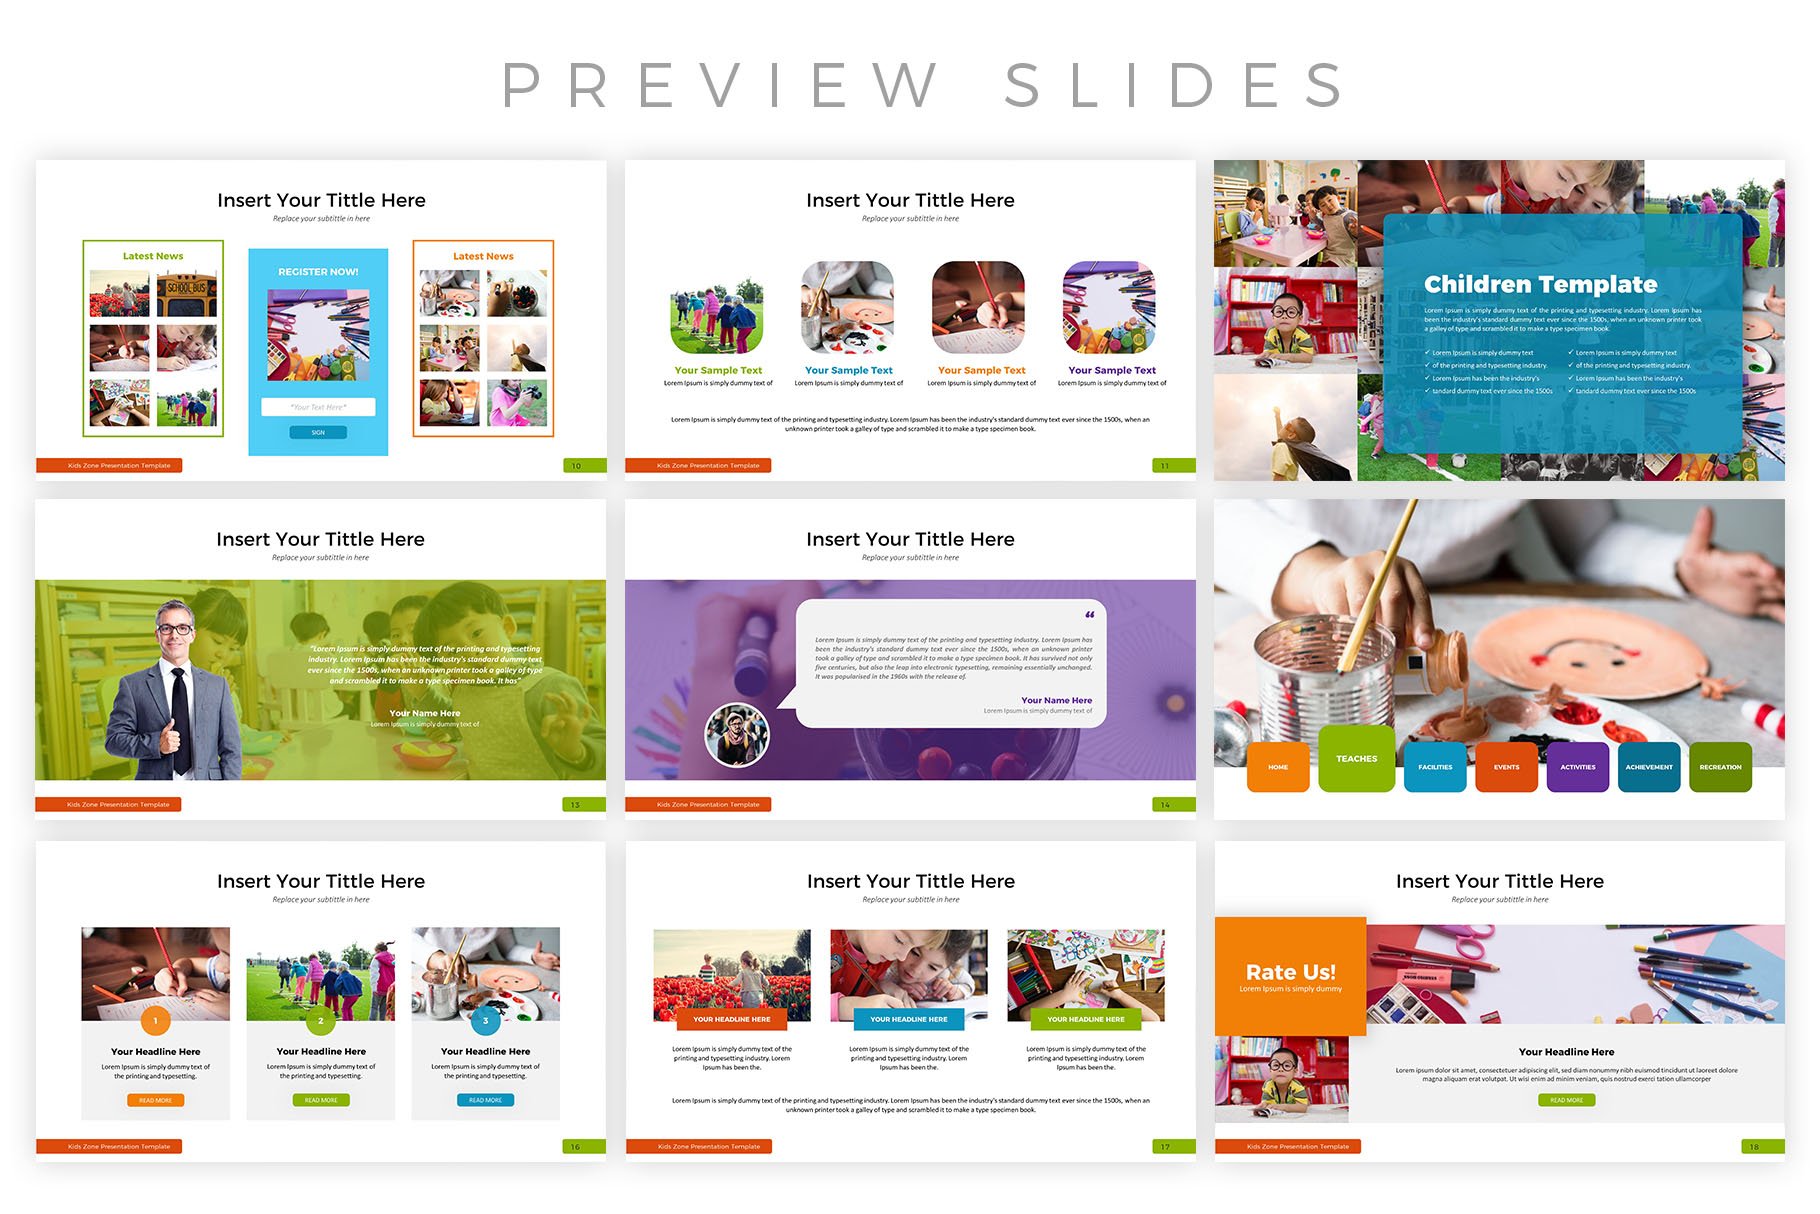 Children Presentation Template is a mobile friendly template with an adaptive design.